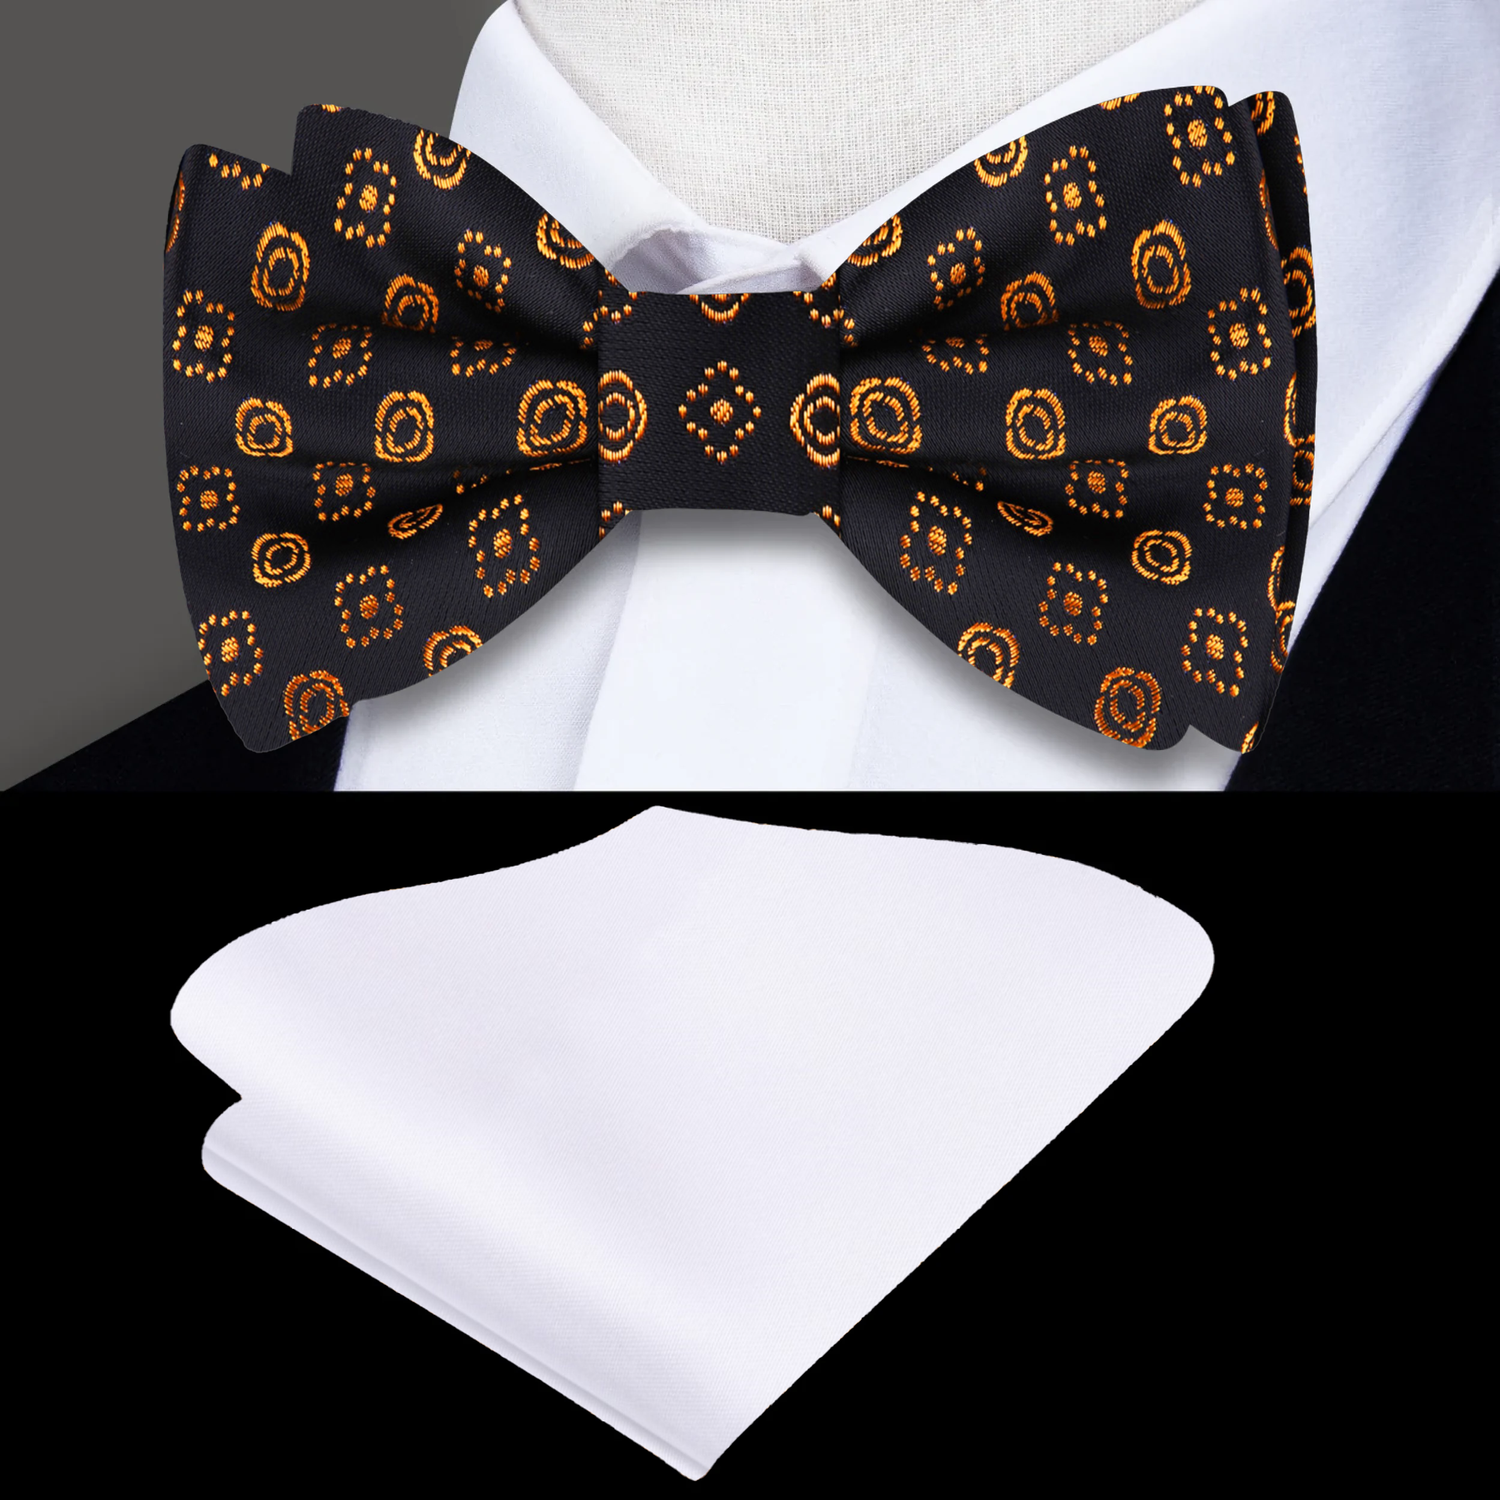 Black, Blue, Deep Gold Lines With Flowers Bow Tie and White Pocket Square| 